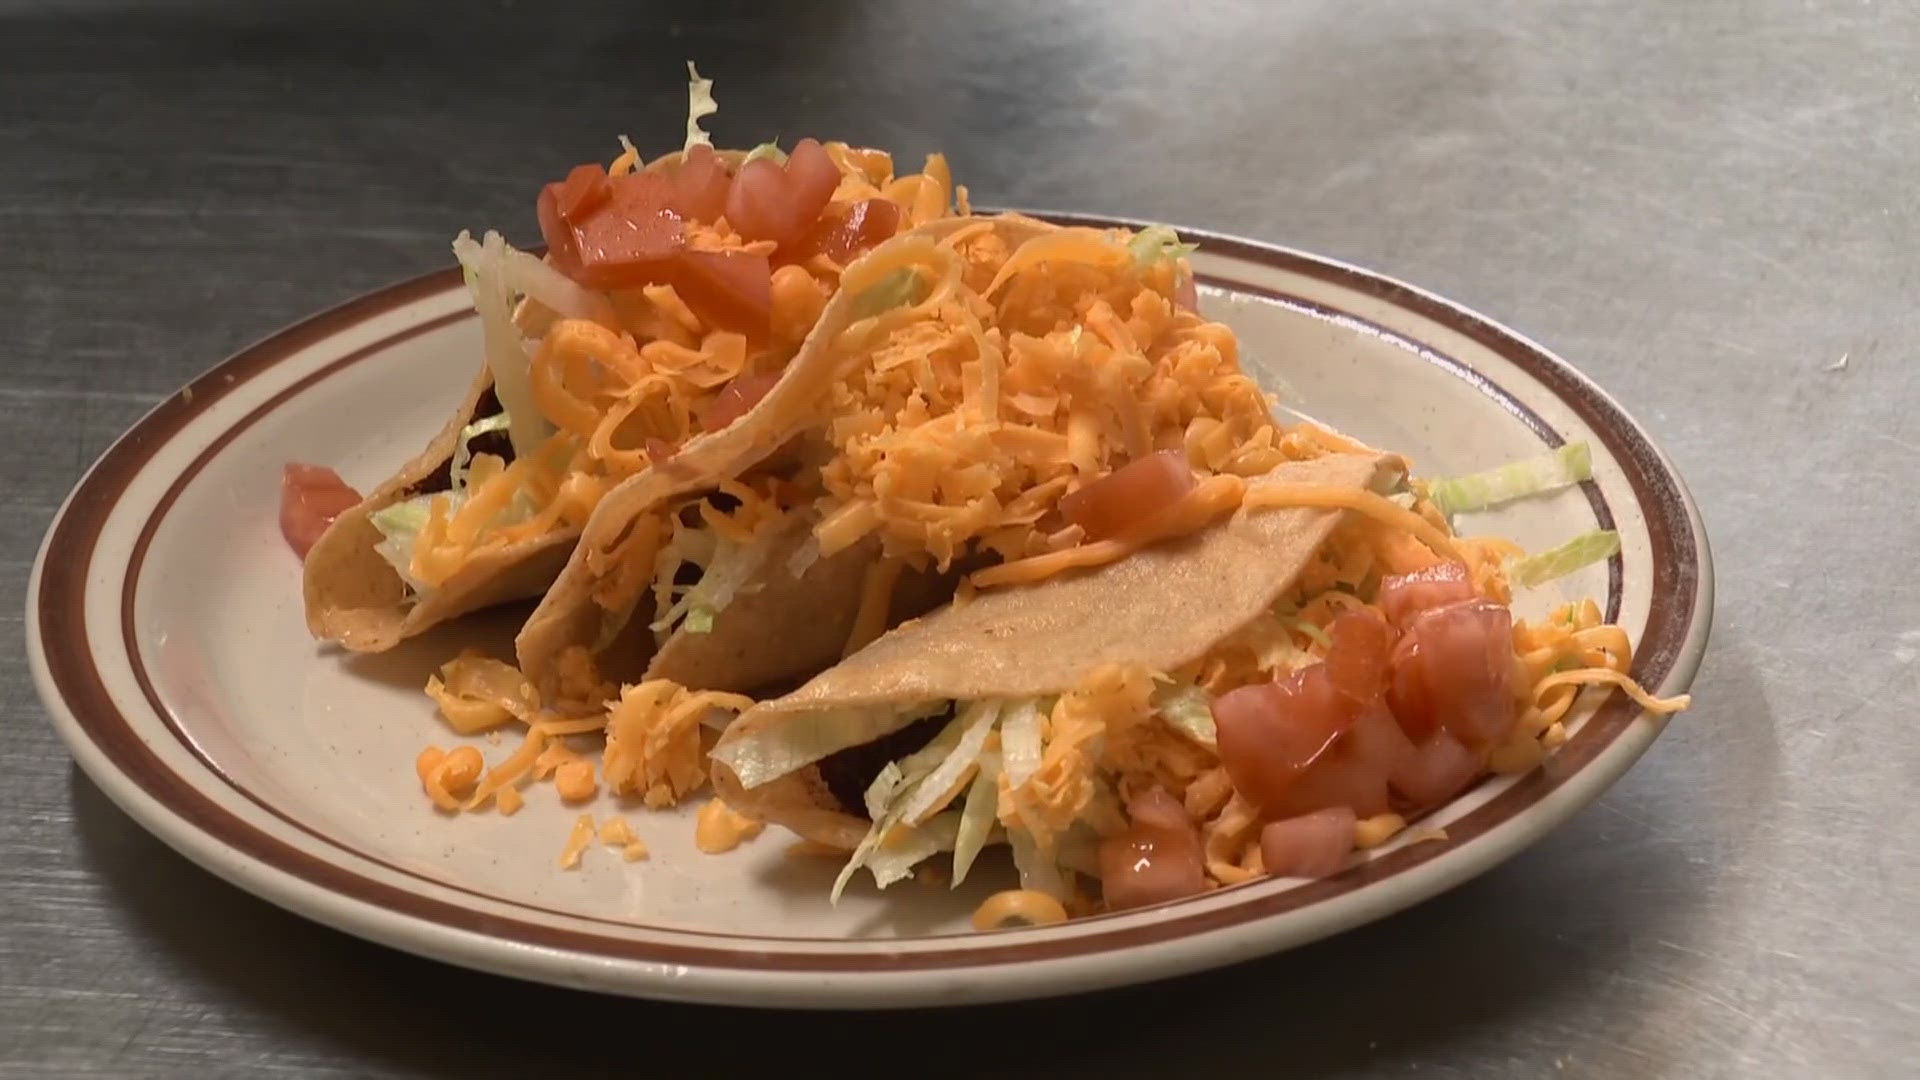 A judge had to rule on the question after an Indiana man opened a taco shop in an area designated for sandwich shops.